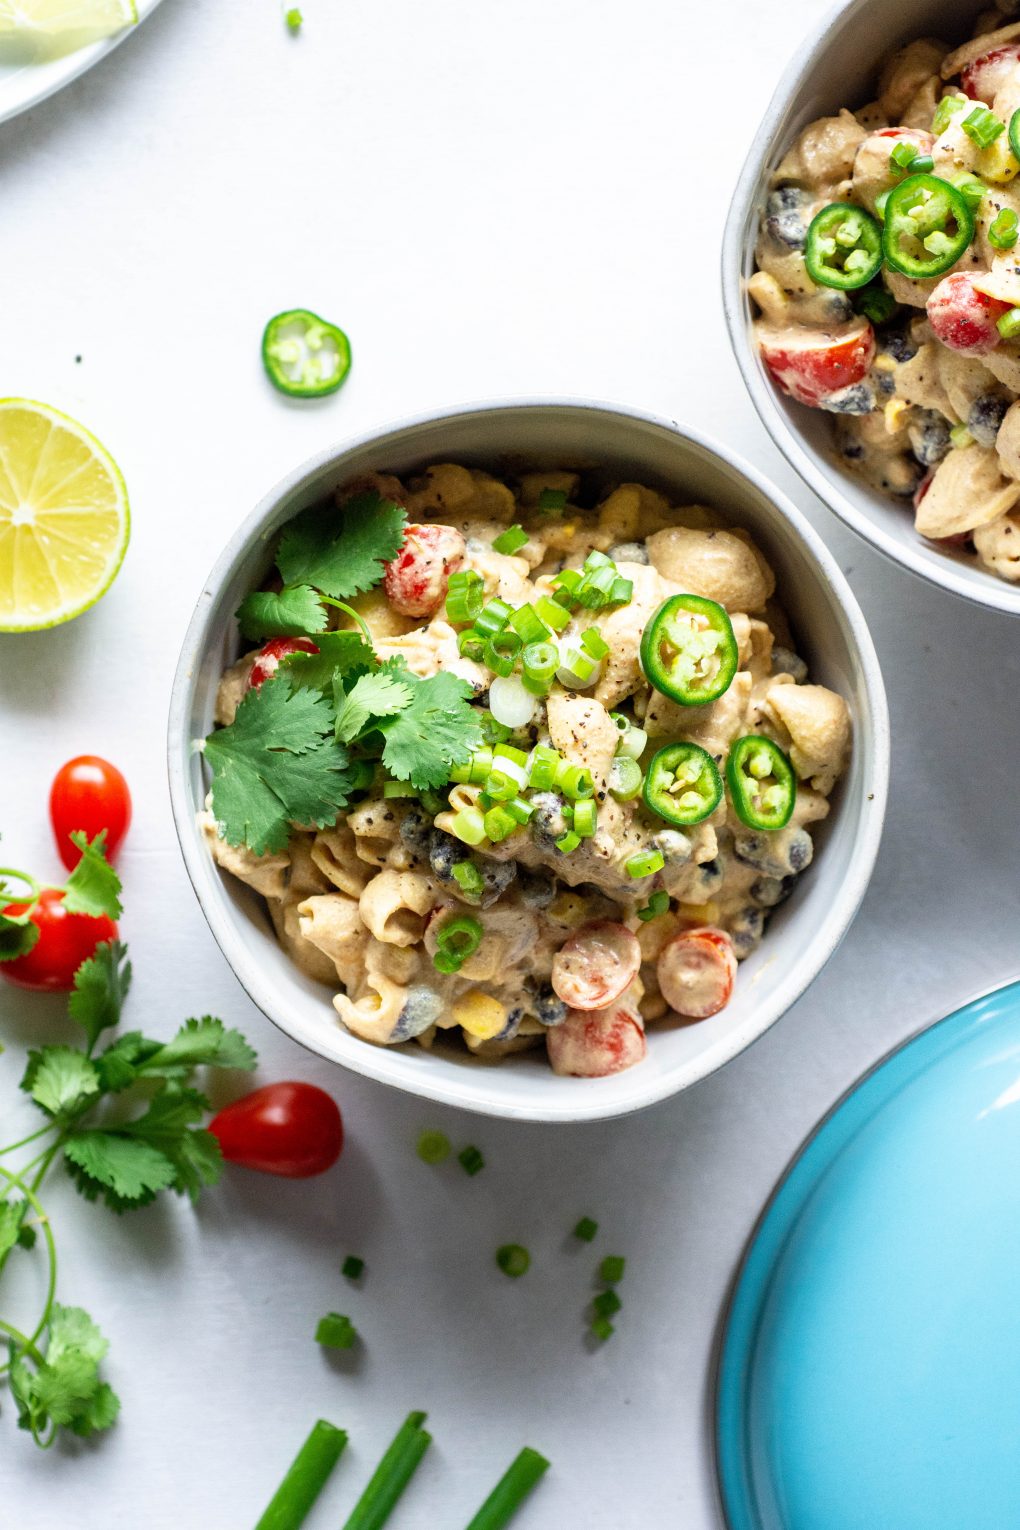 Two side by side bowls of vegan mexican mac and cheese topped with green onions, jalapeno, and fresh cilantro. On a light background surrounded by sliced lime, cherry tomatoes, and fresh herb.